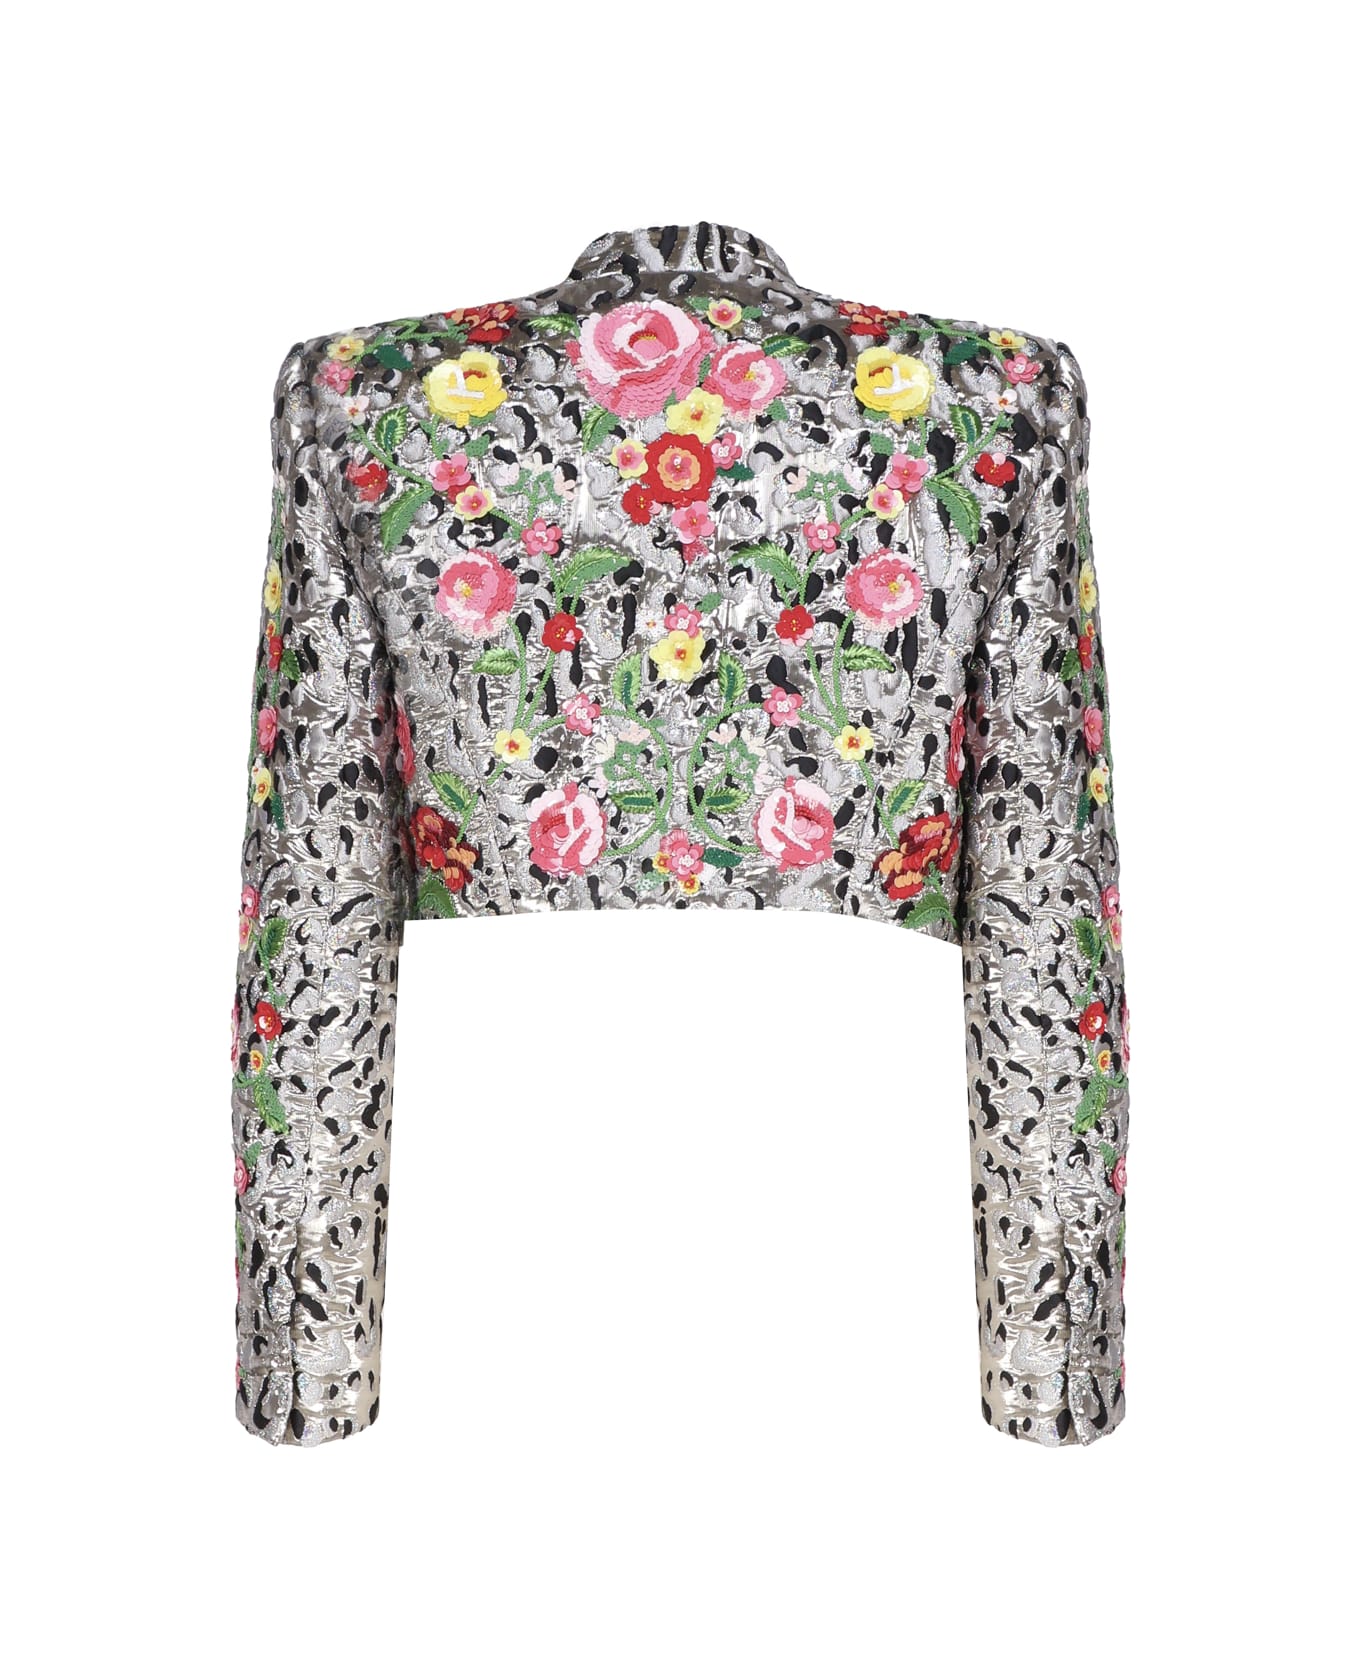 Dolce & Gabbana Jacket With Animal Print And Flowers - Multicolor